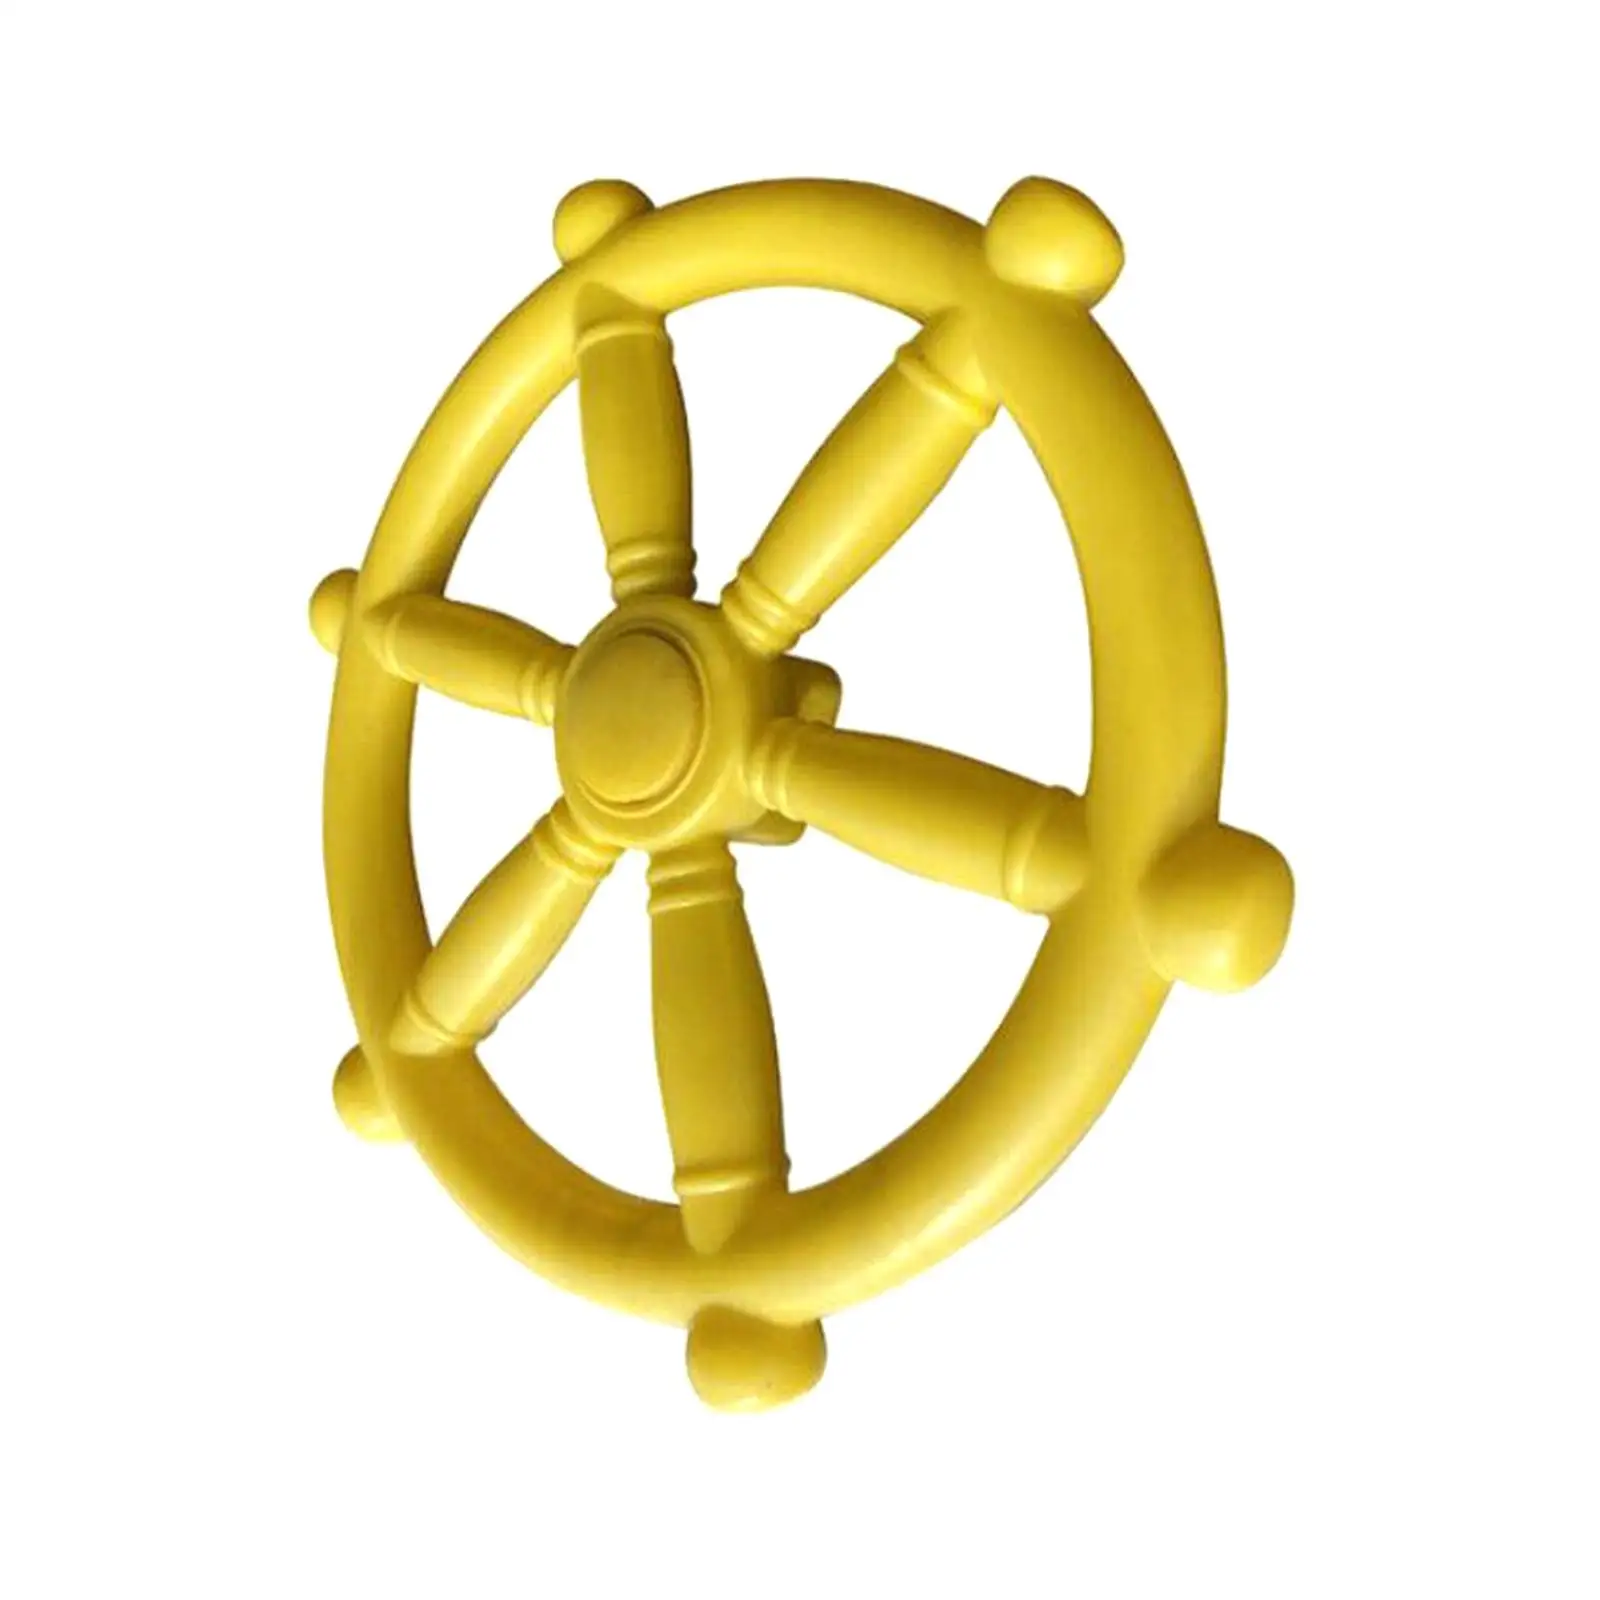 Pirate Ship Wheel Playground Accessories for Park Swingset Jungle Gym